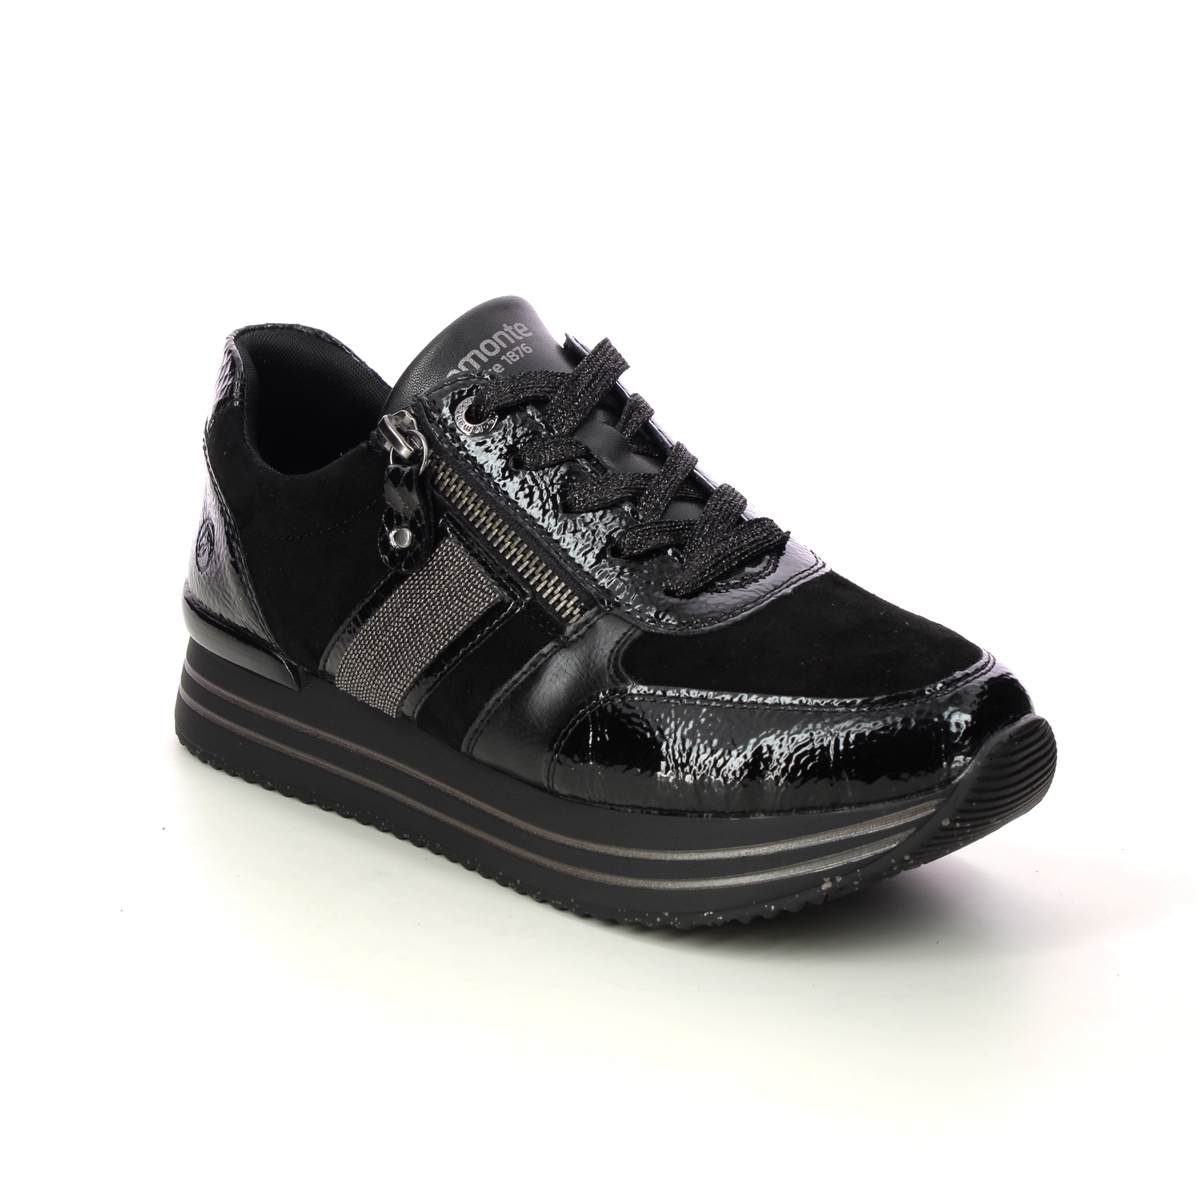 Remonte Ranger Black Patent Suede Womens Trainers D1321-01 In Size 40 In Plain Black Patent Suede